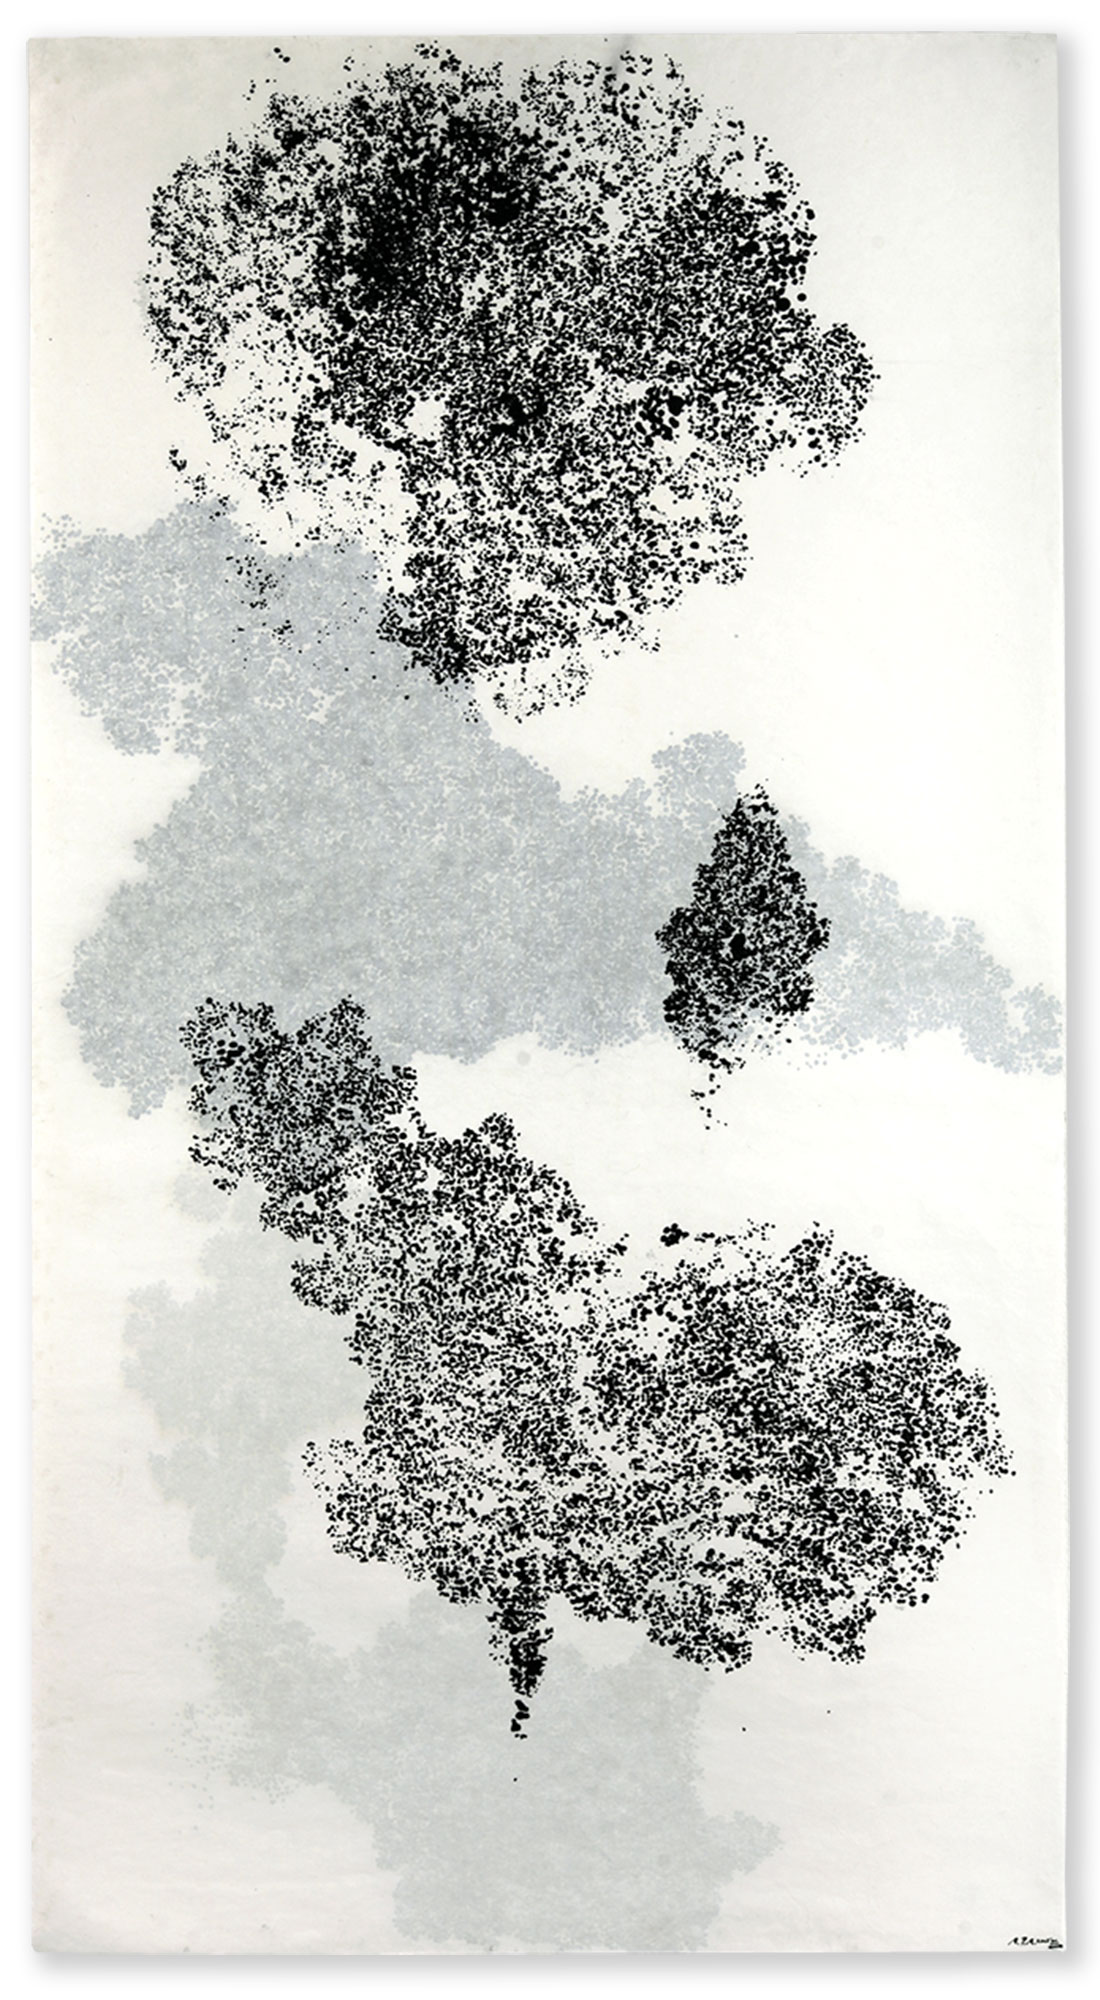 GUANGDONG SERIES XIII / 2006, ink on Xuan paper, 180 x 95 cm